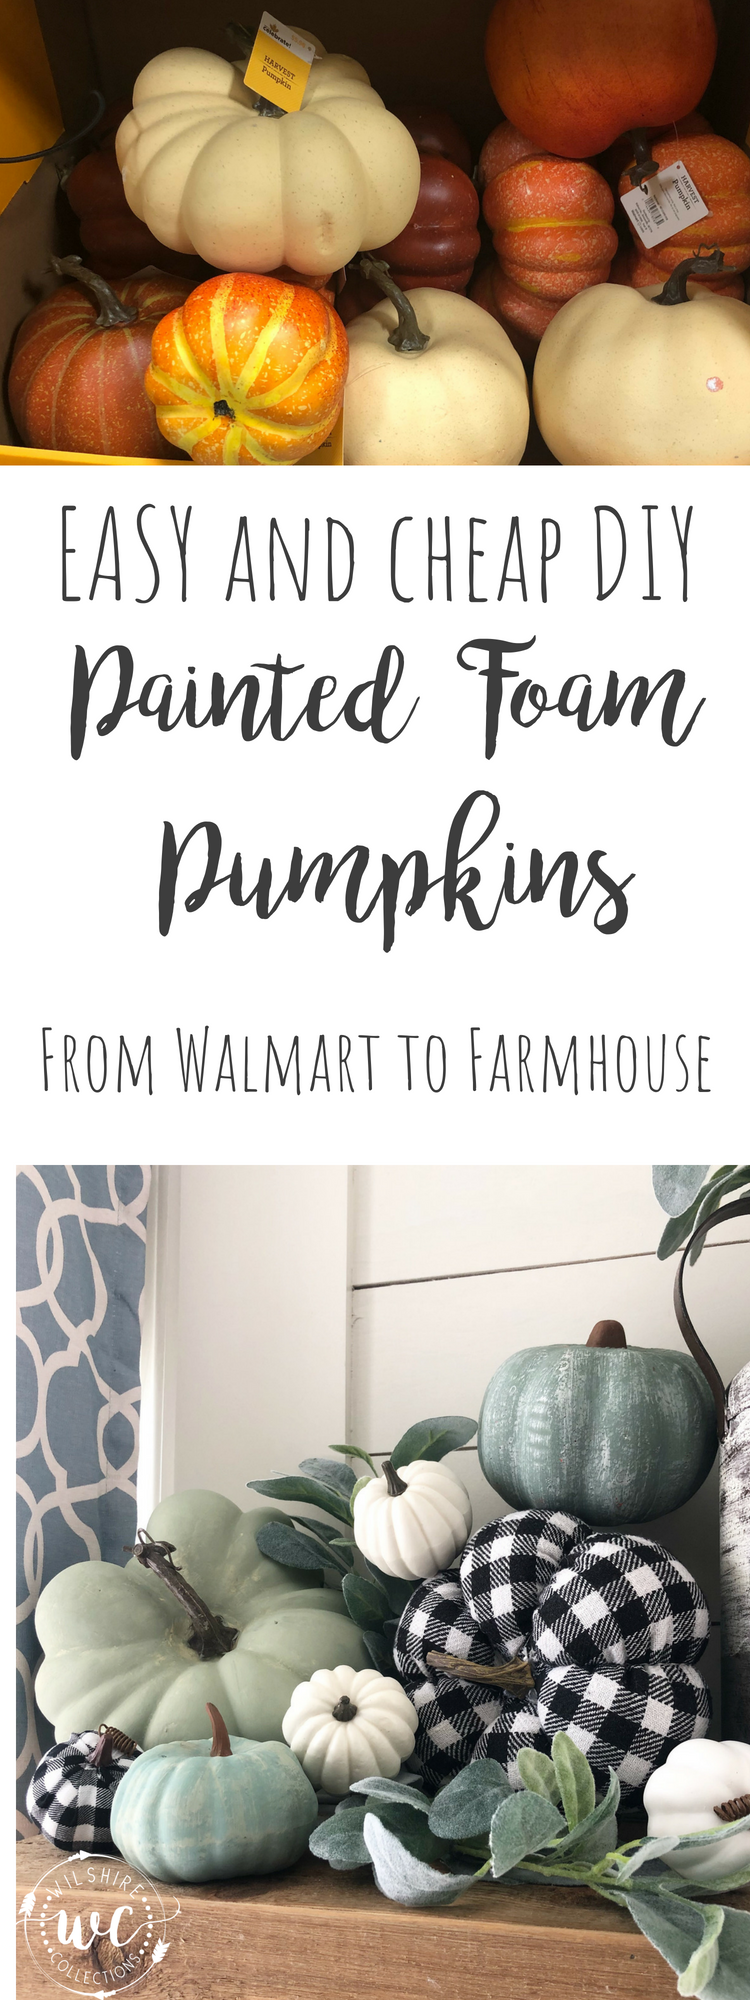 DIY Fall painted foam pumpkins. From Dollar Tree and Walmart orange to a beuatiful farmhouse blue and green. Paired with buffalo check pumpkins for the perfect Farmhouse fall look. Easy and quick DIY